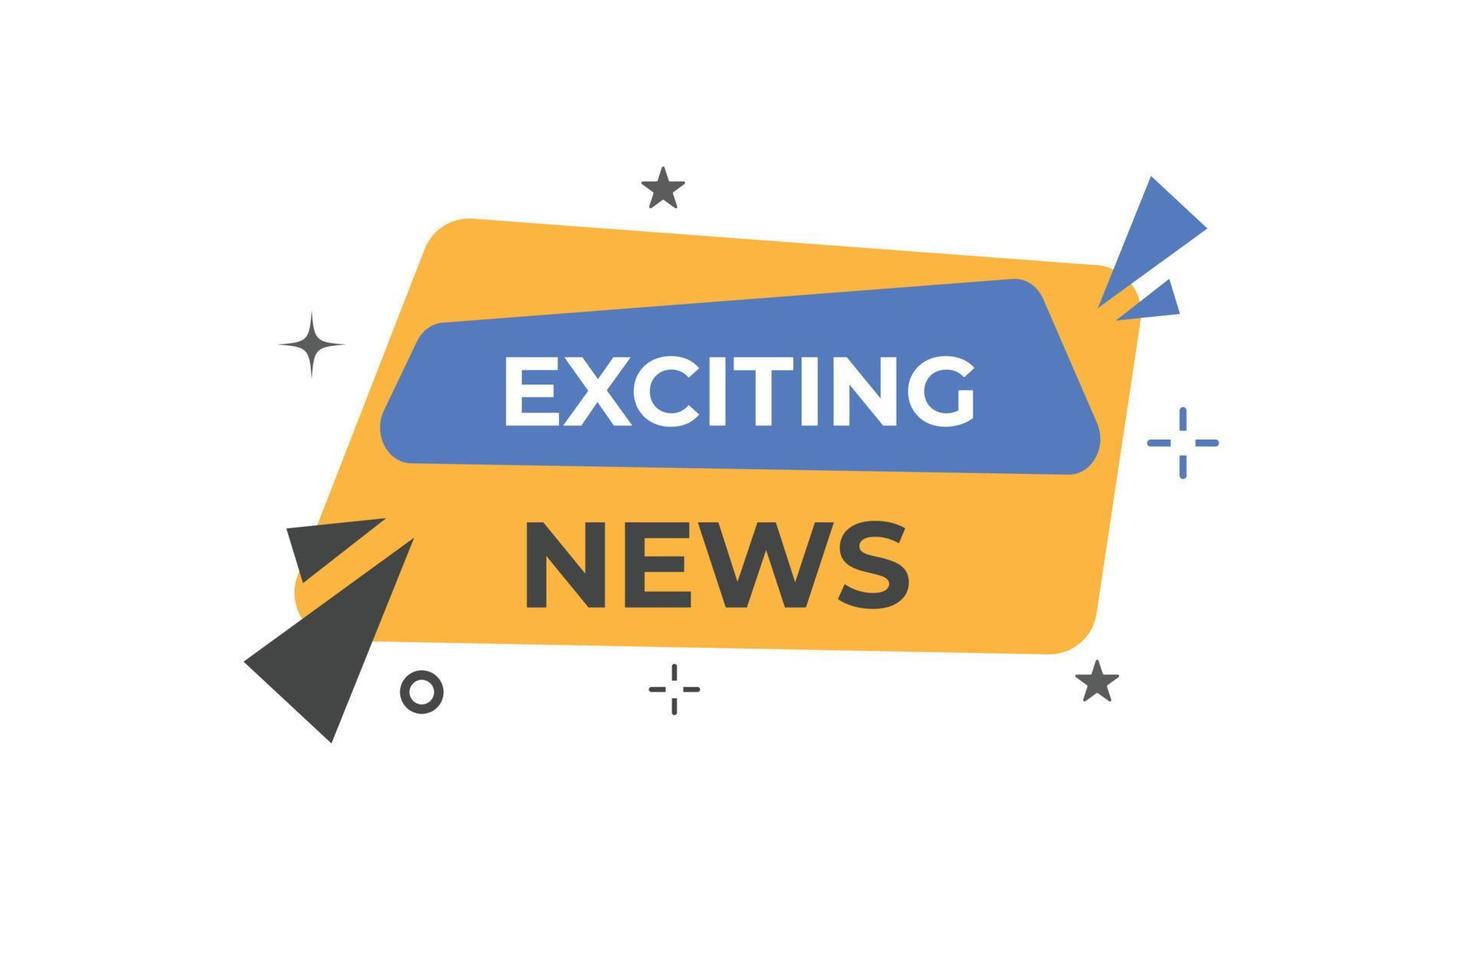 Exciting News Button. Speech Bubble, Banner Label Exciting News vector